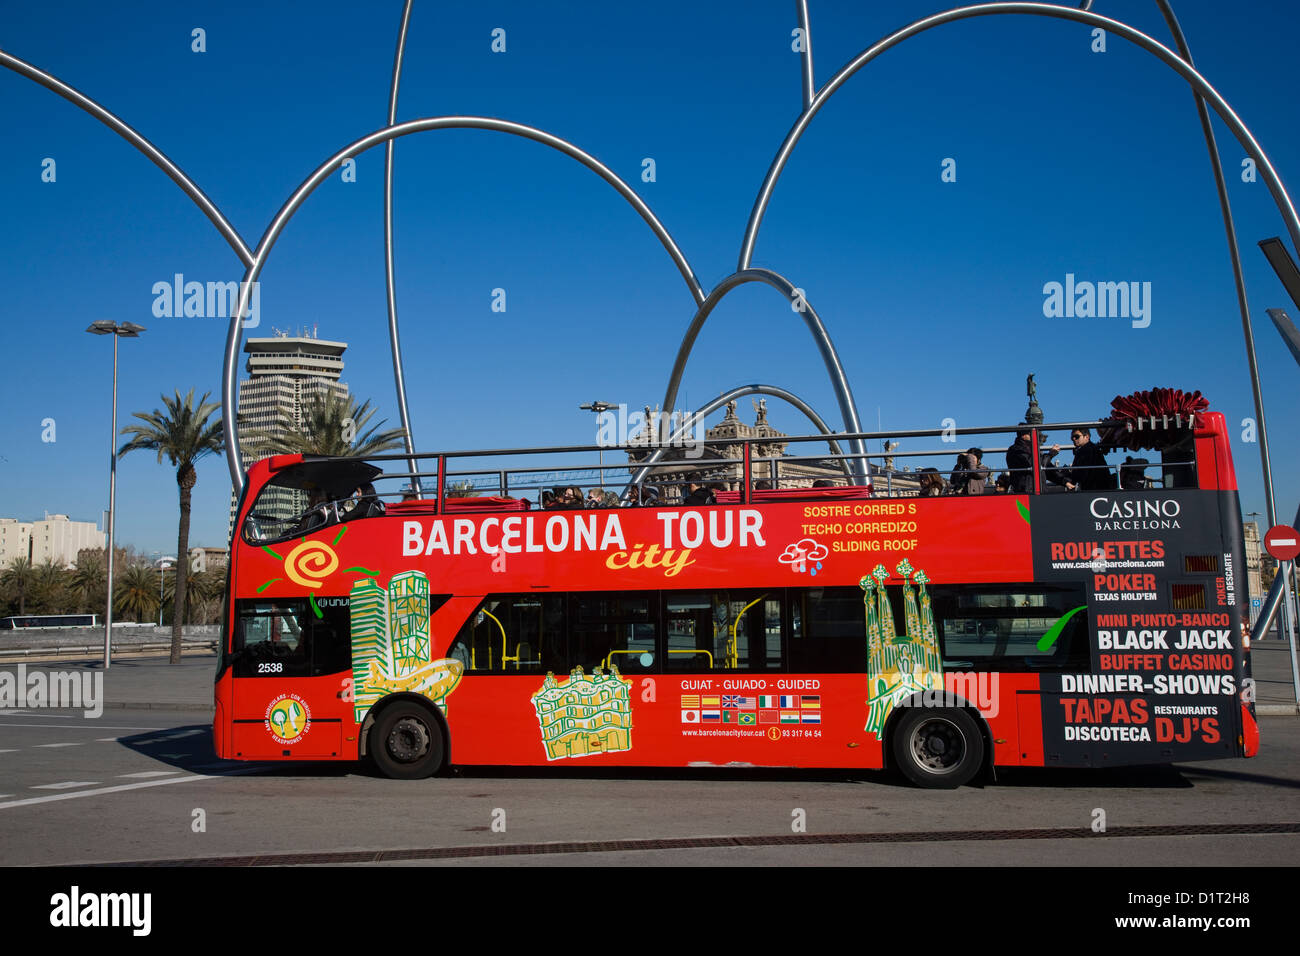 City Sightseeing double decker tour bus in Barcelona, Spain Stock Photo